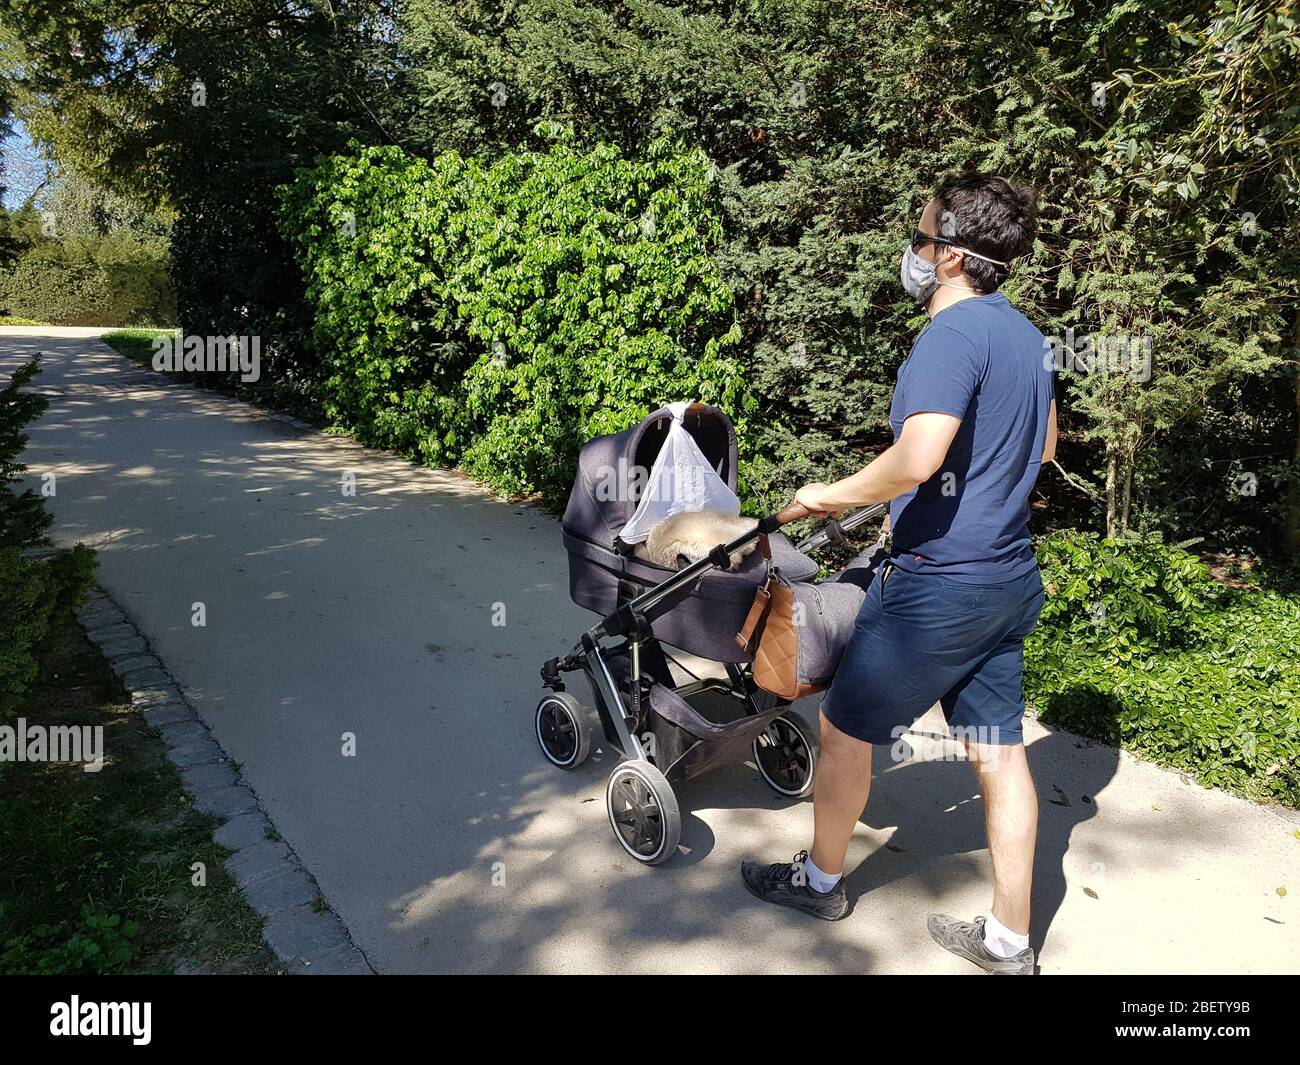 Person ( man / male father ) wear dust / protective / surgical / face mask while walking through park with baby buggy carriage - corona virus covid-19 Stock Photo